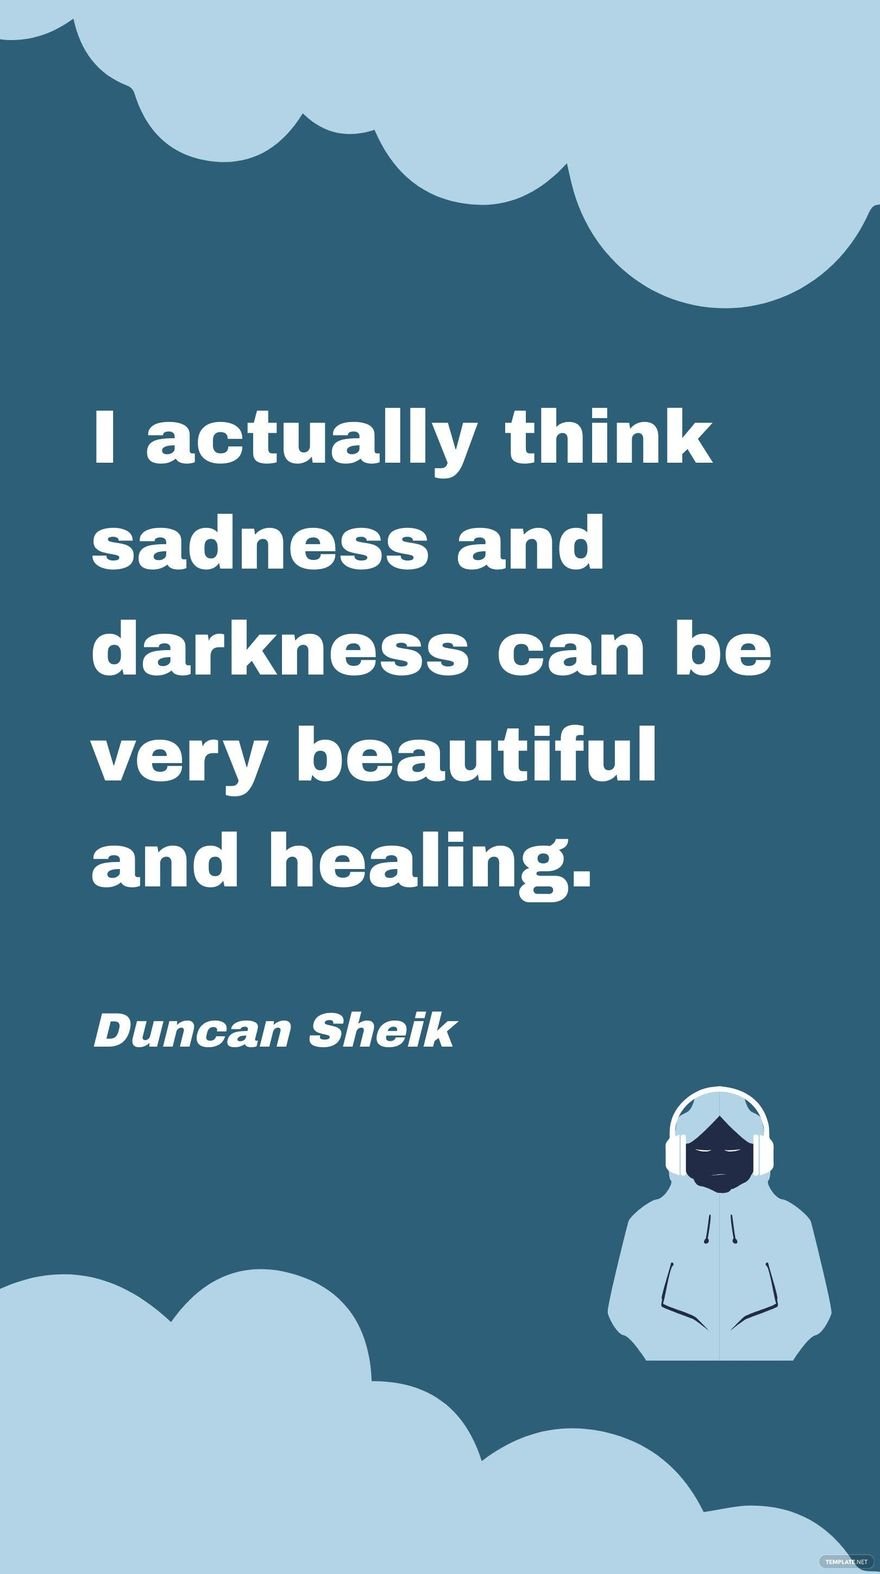 Duncan Sheik - I actually think sadness and darkness can be very beautiful and healing. in JPG